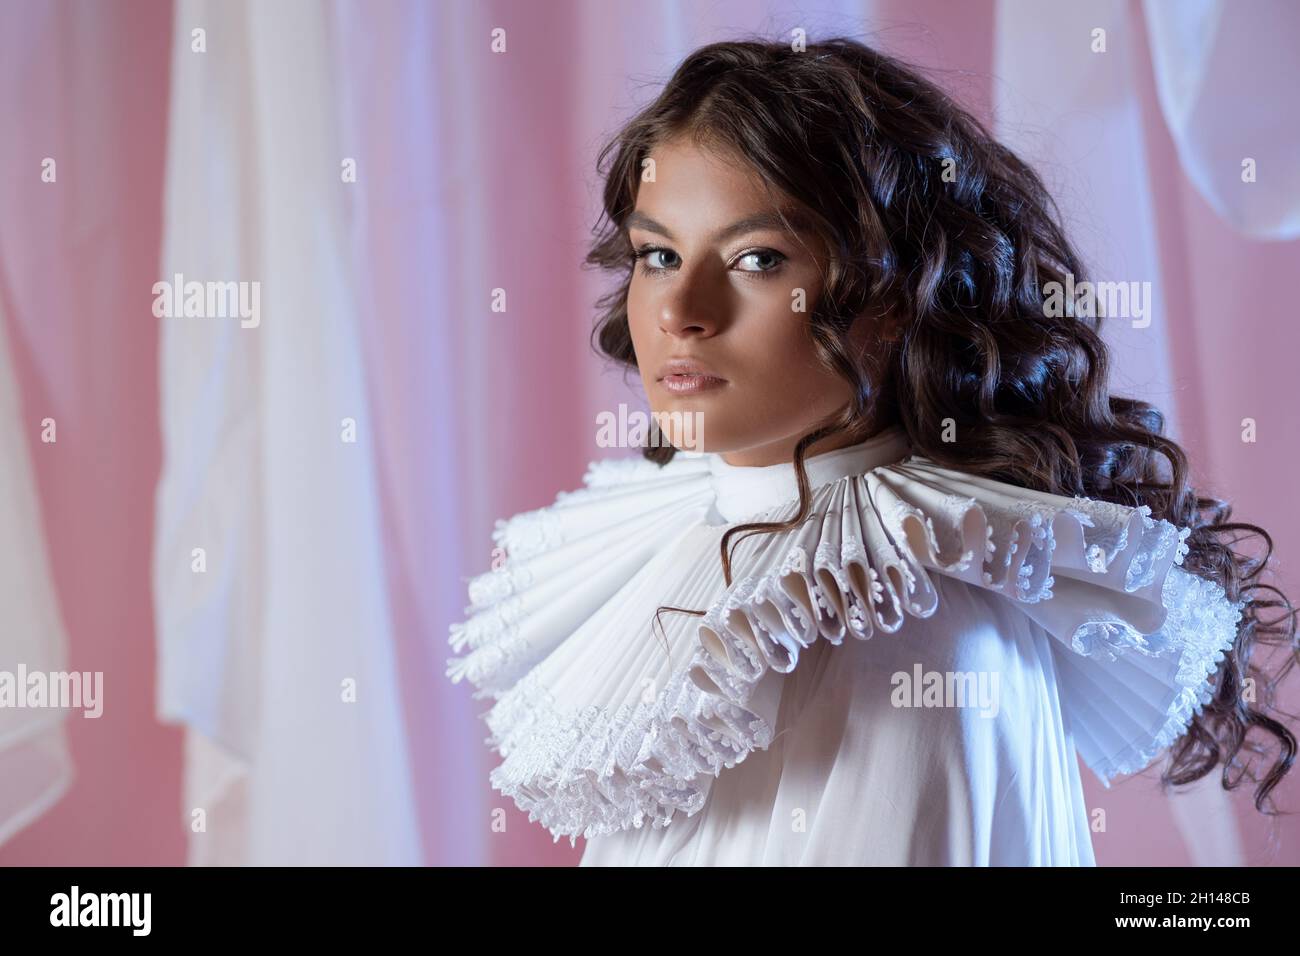 glamorous portrait of noble lady in white blouse and medieval round collar around her neck. young beautiful brunette in medieval costume, a portrait i Stock Photo